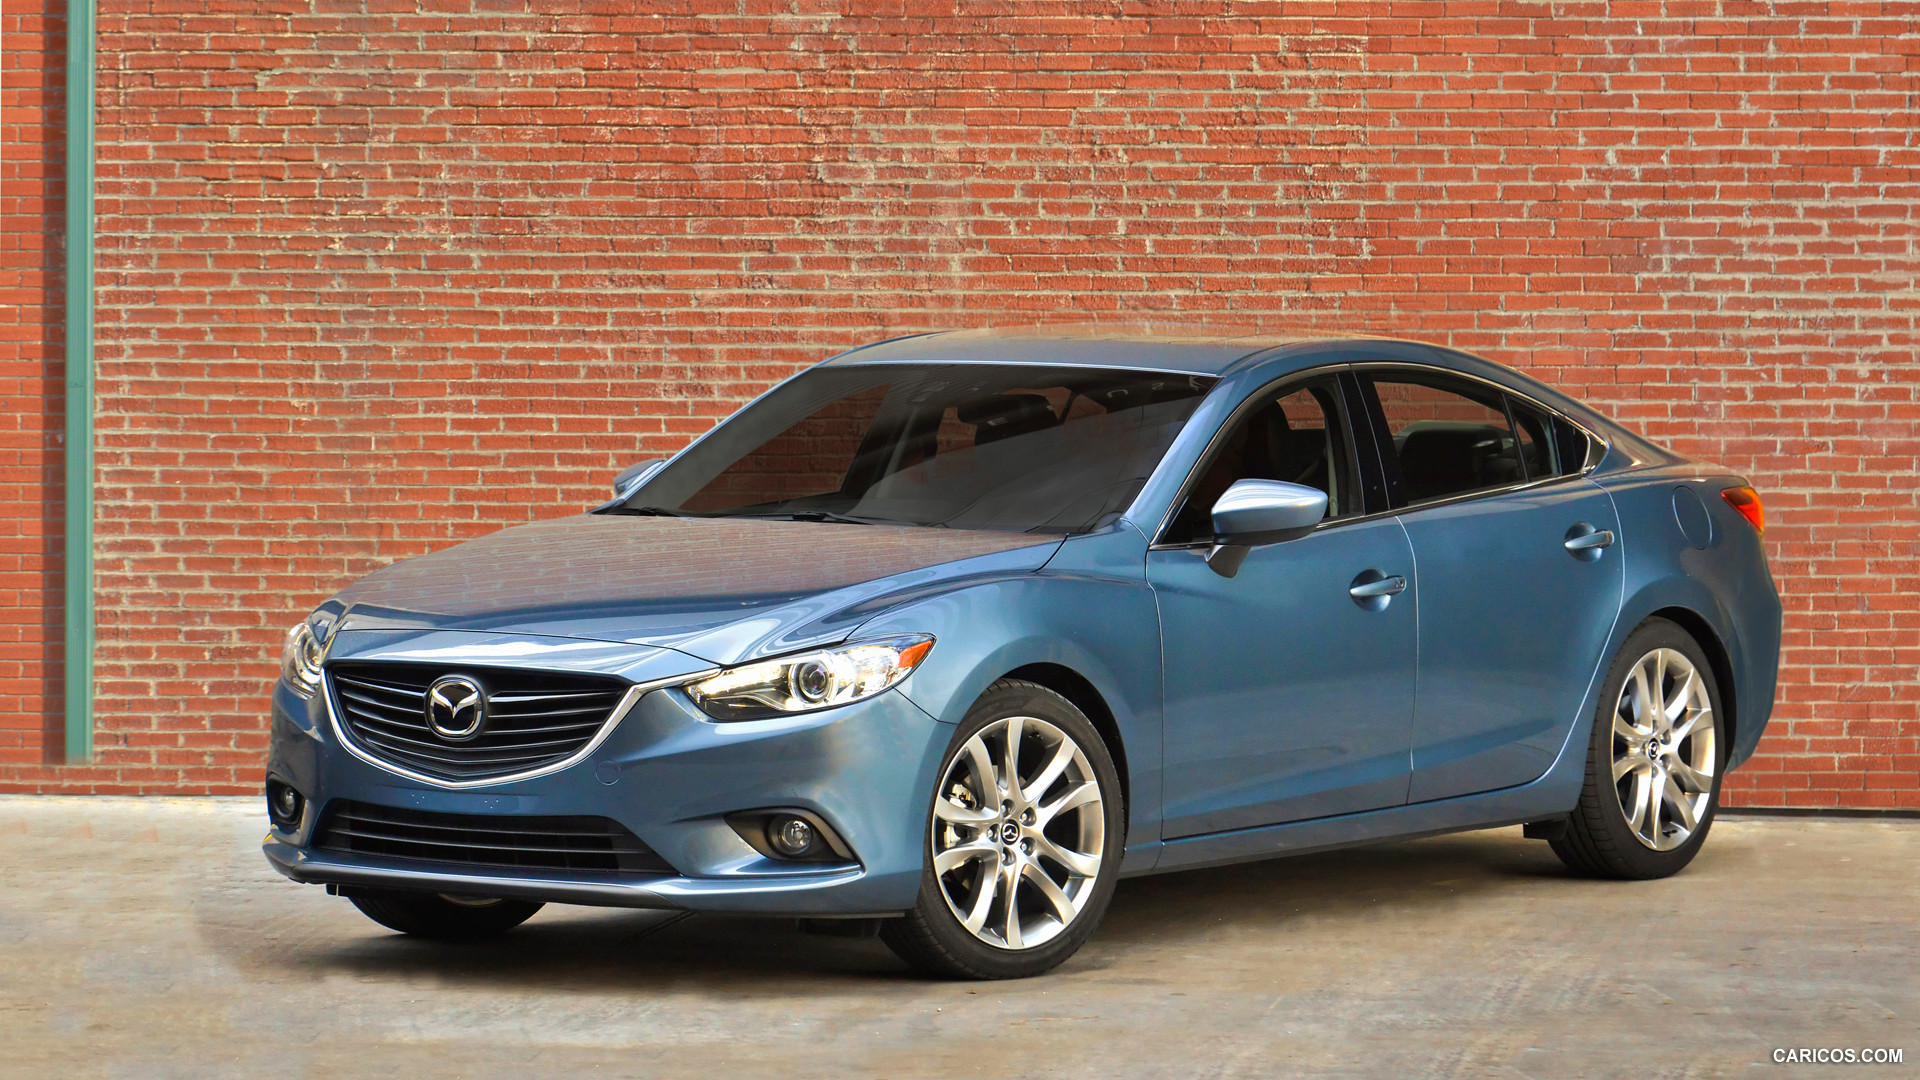 2014 Mazda6 GT - Front, #137 of 179